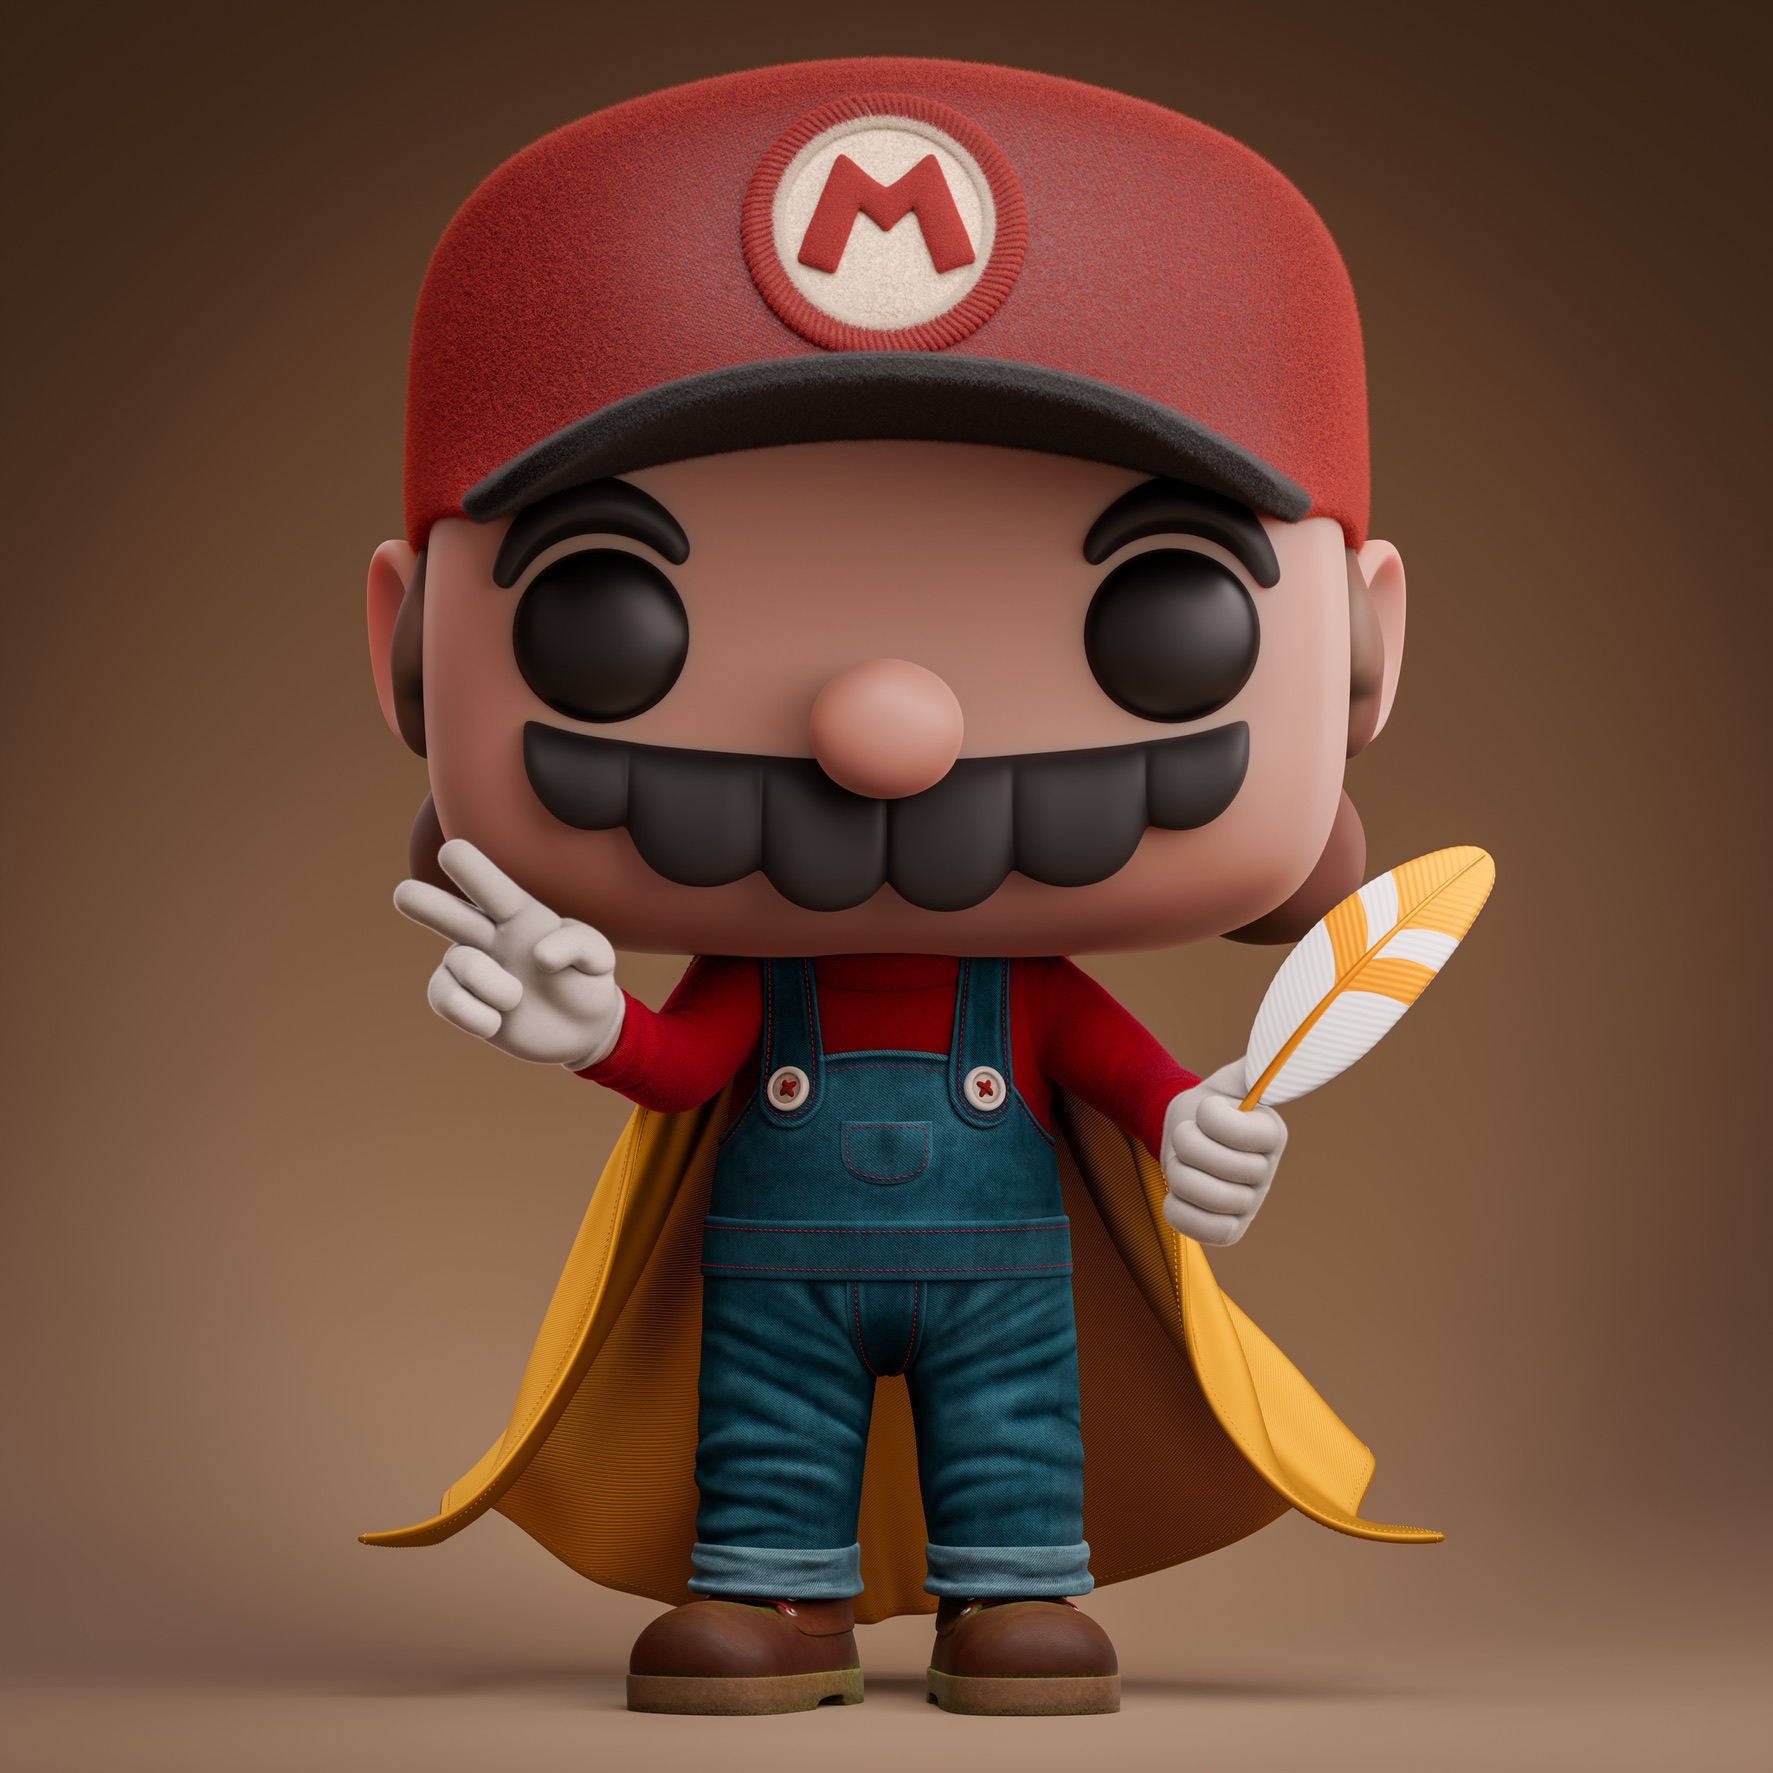 Funko Pop - Mario World - Finished Projects - Blender Community